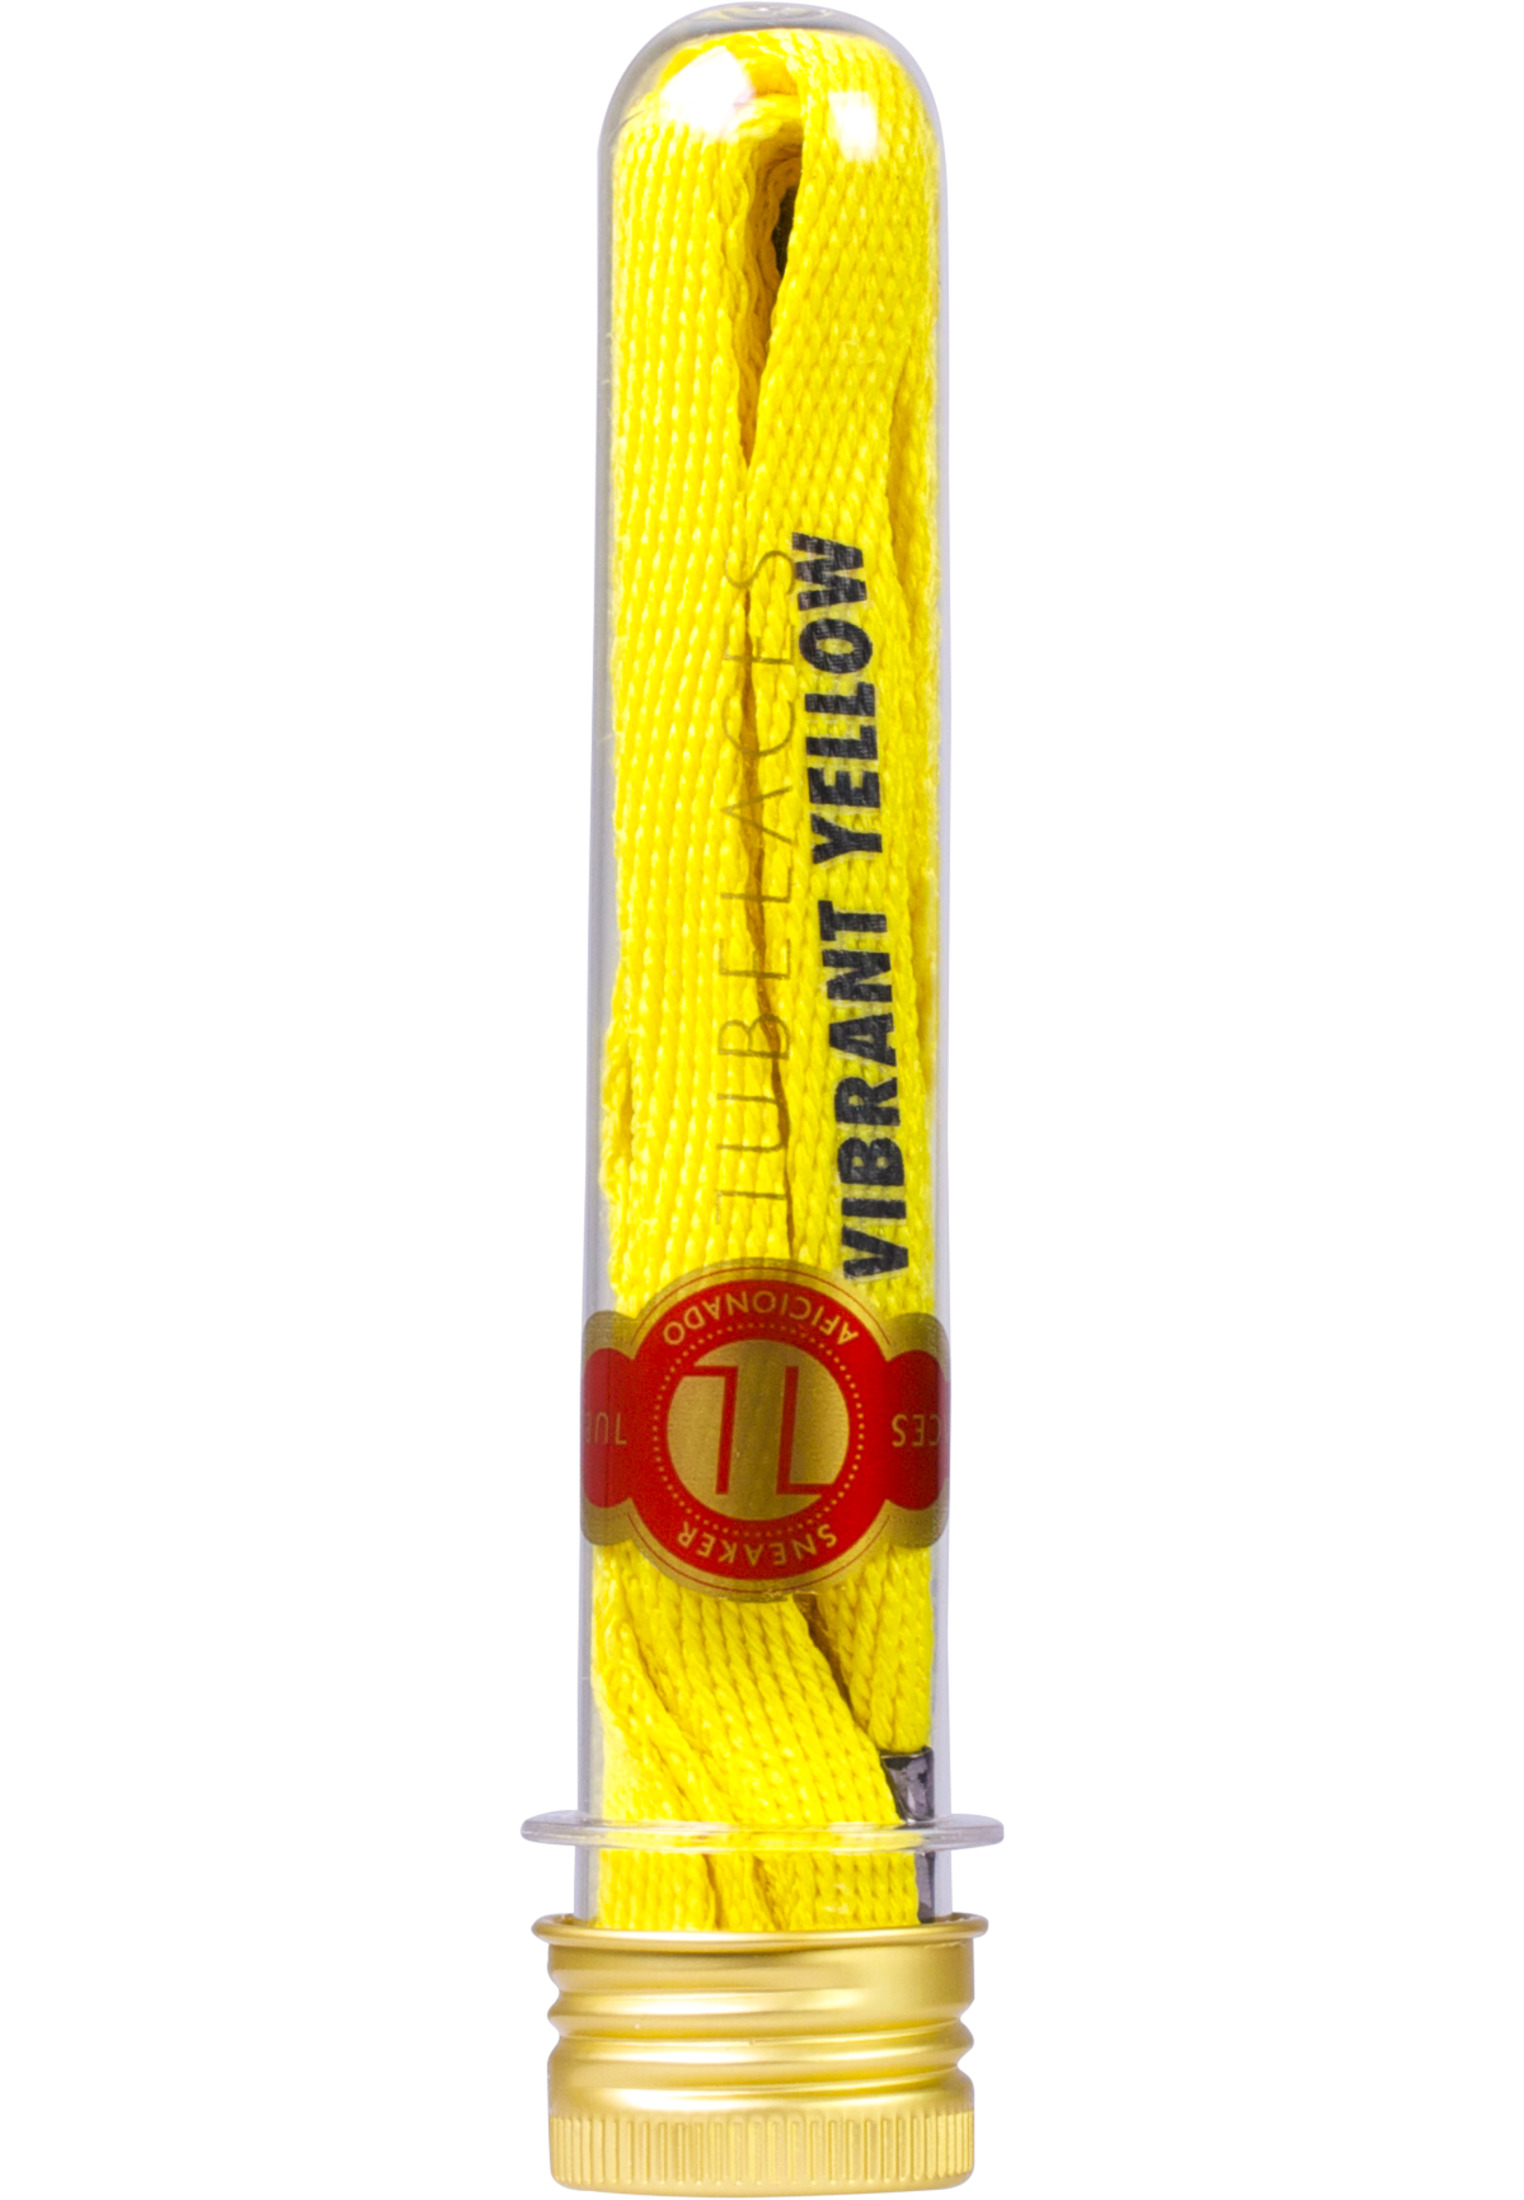 Laces Tubelaces Hook UP Pack (5er) in Farbe vibrant yellow